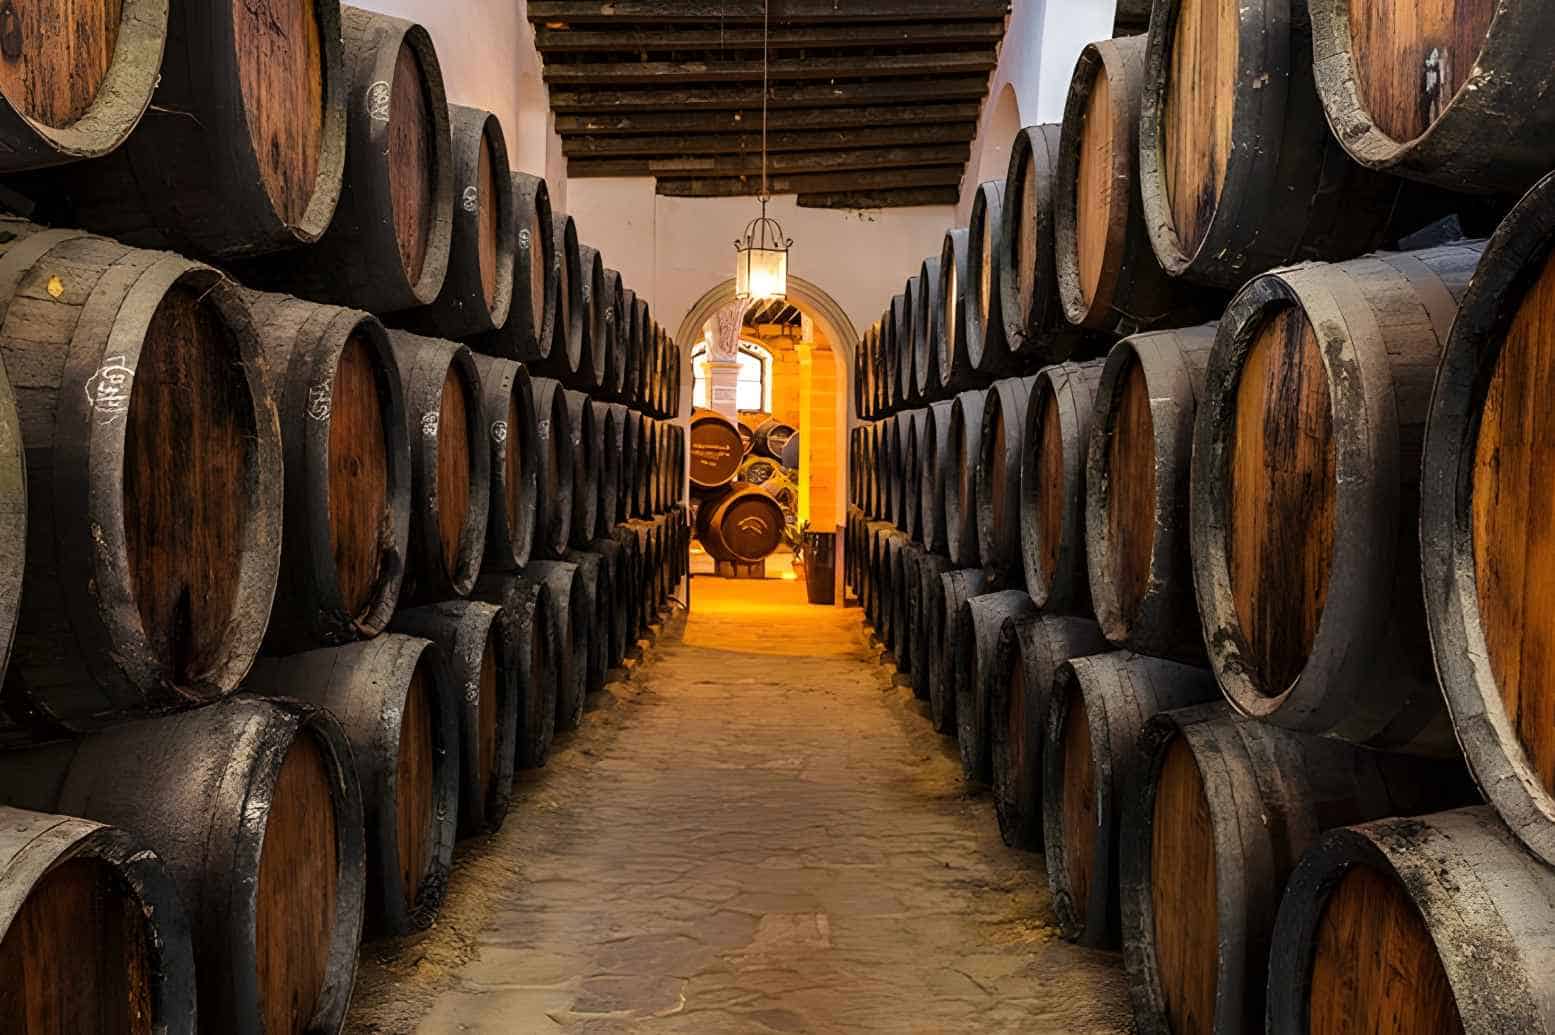 How Is the Sherry Wine Made